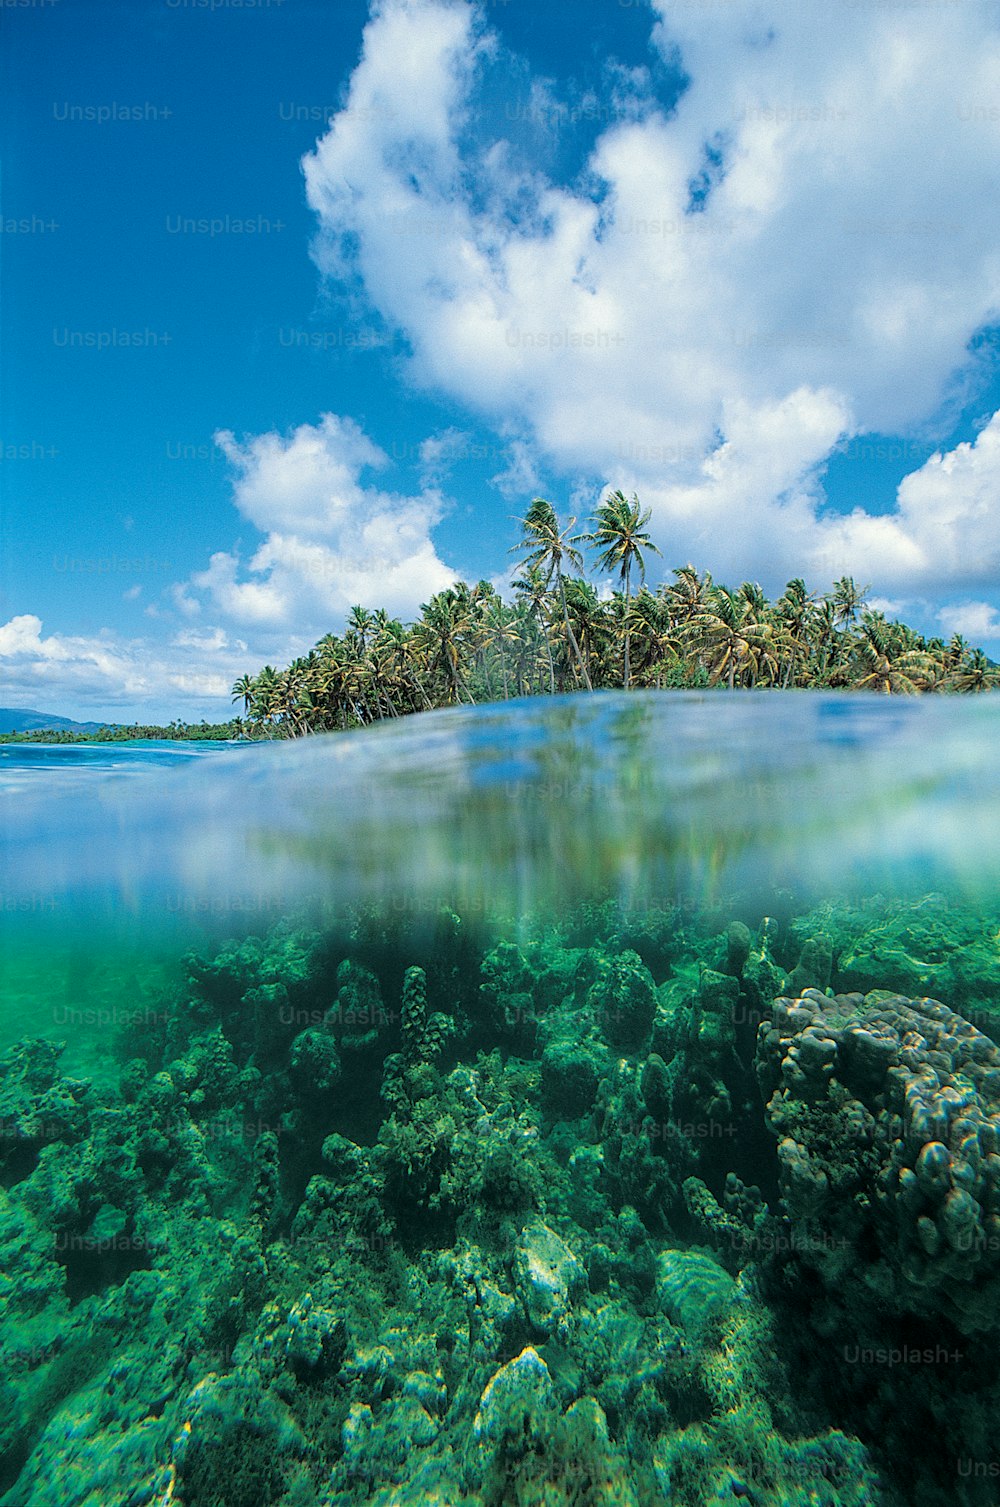 an underwater view of a tropical island with palm trees